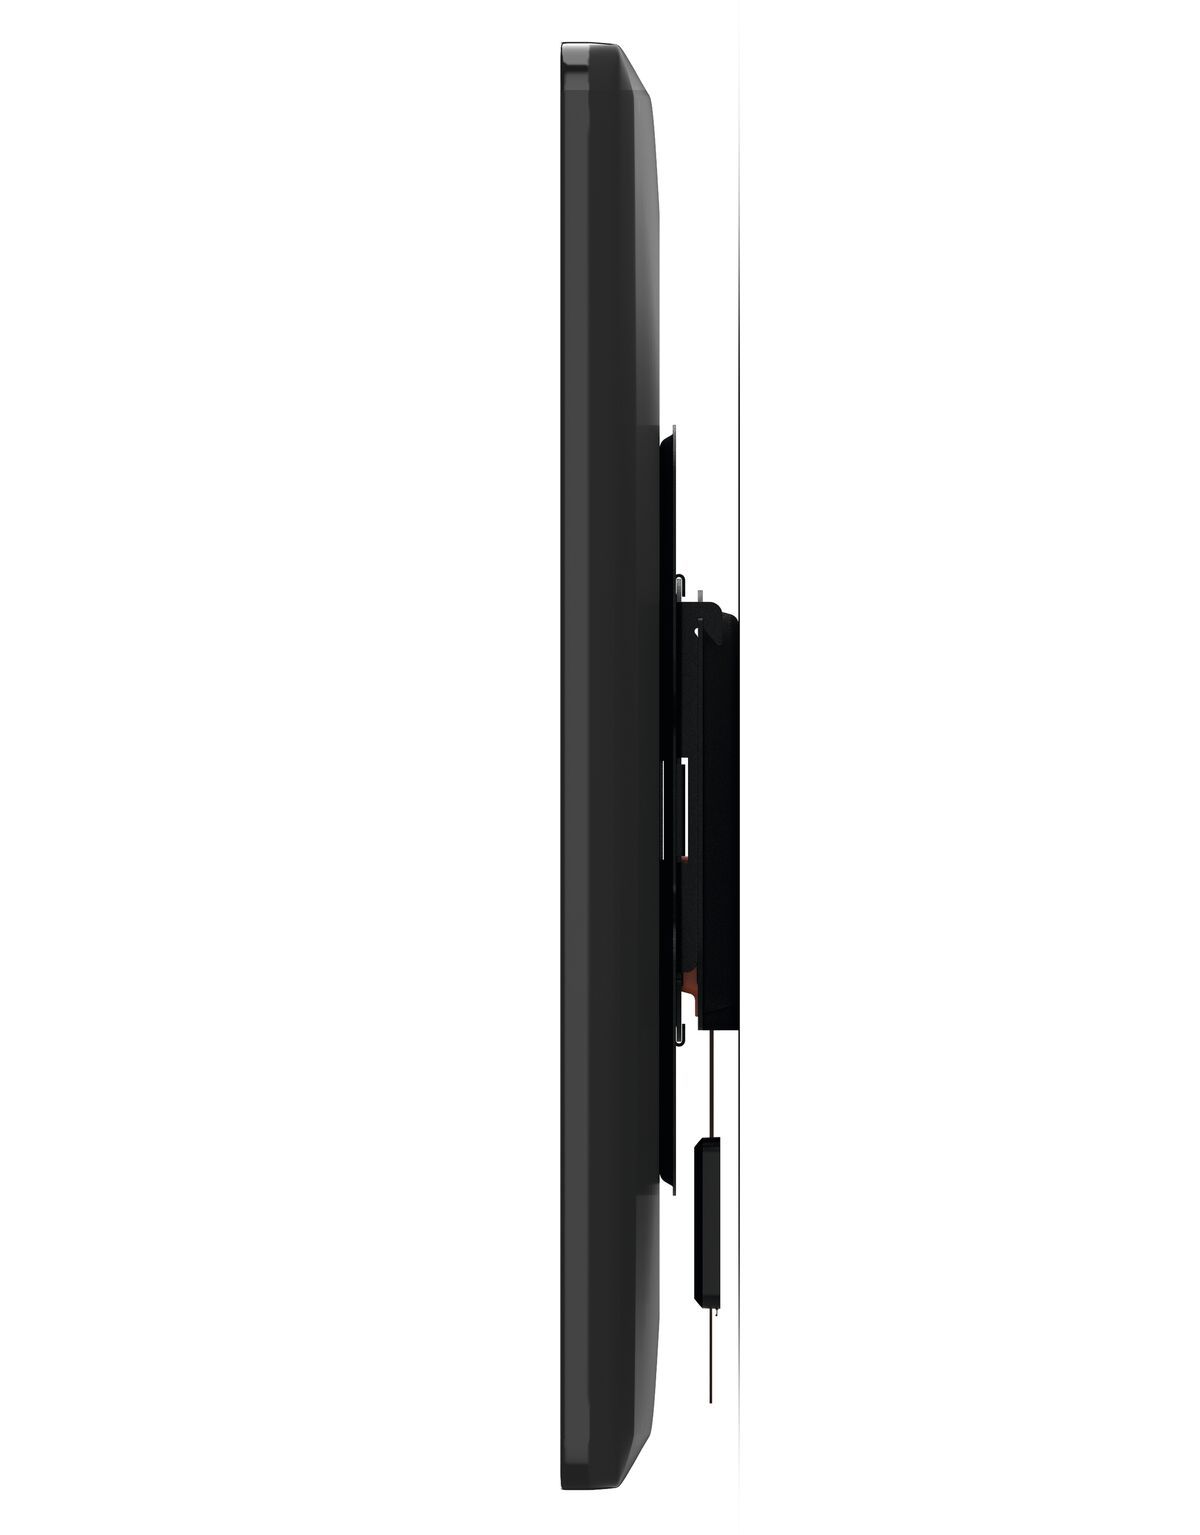 Vogel's WALL 2105 Fixed TV Wall Mount - Suitable for 19 up to 40 inch TVs up to Detail